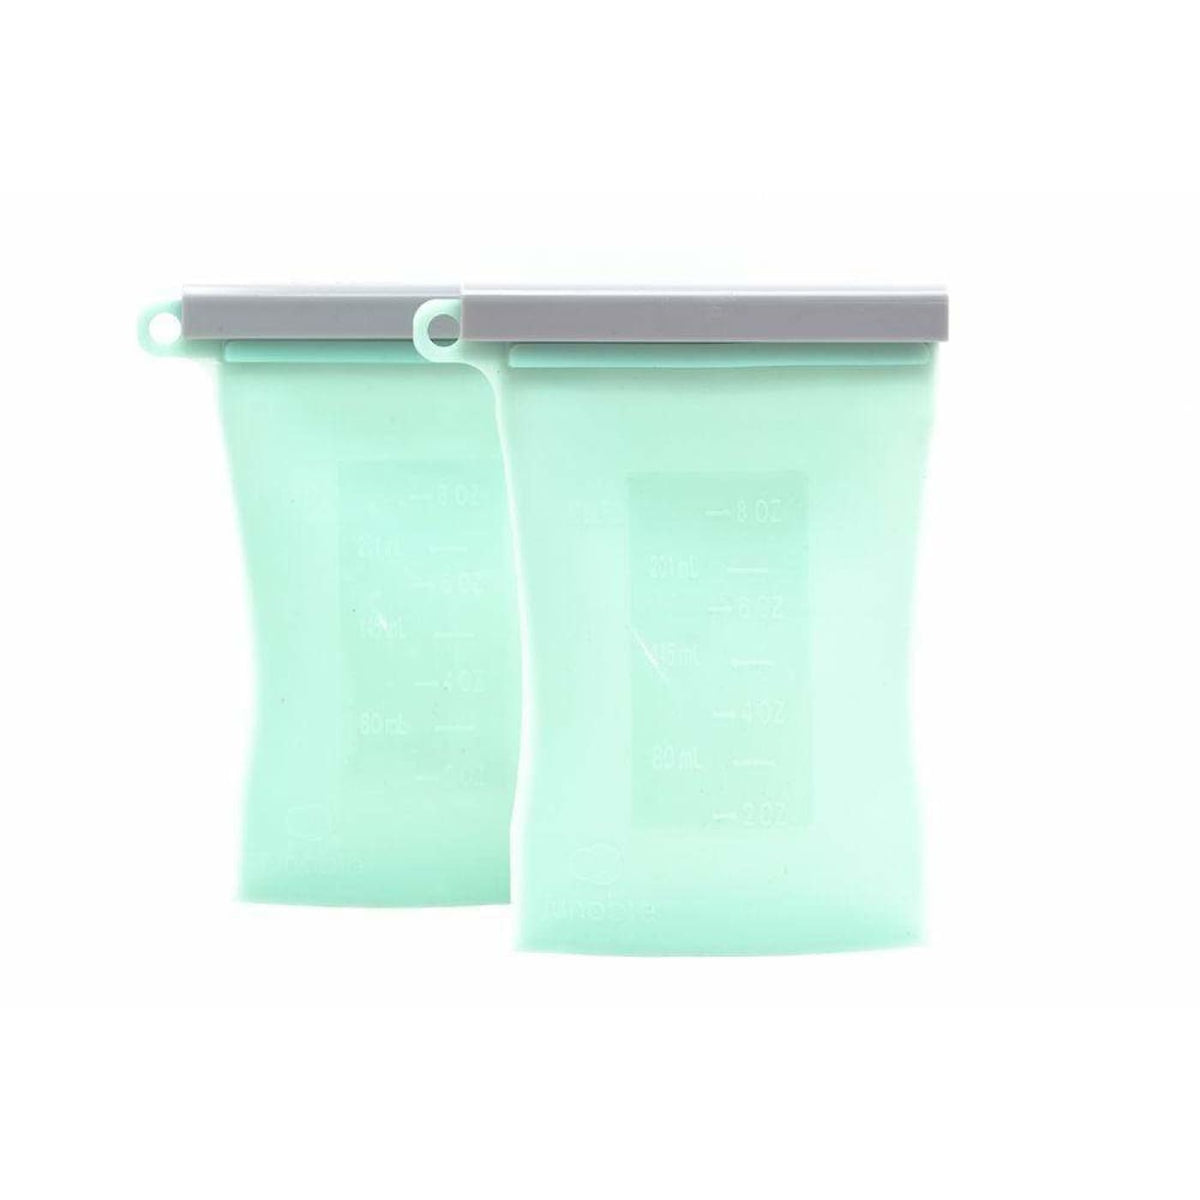 Junobie Reusable Silicone Breastmilk Storage Bags 2Pack - Mint - Mint - NURSING &amp; FEEDING - CONTAINERS/FEEDERS